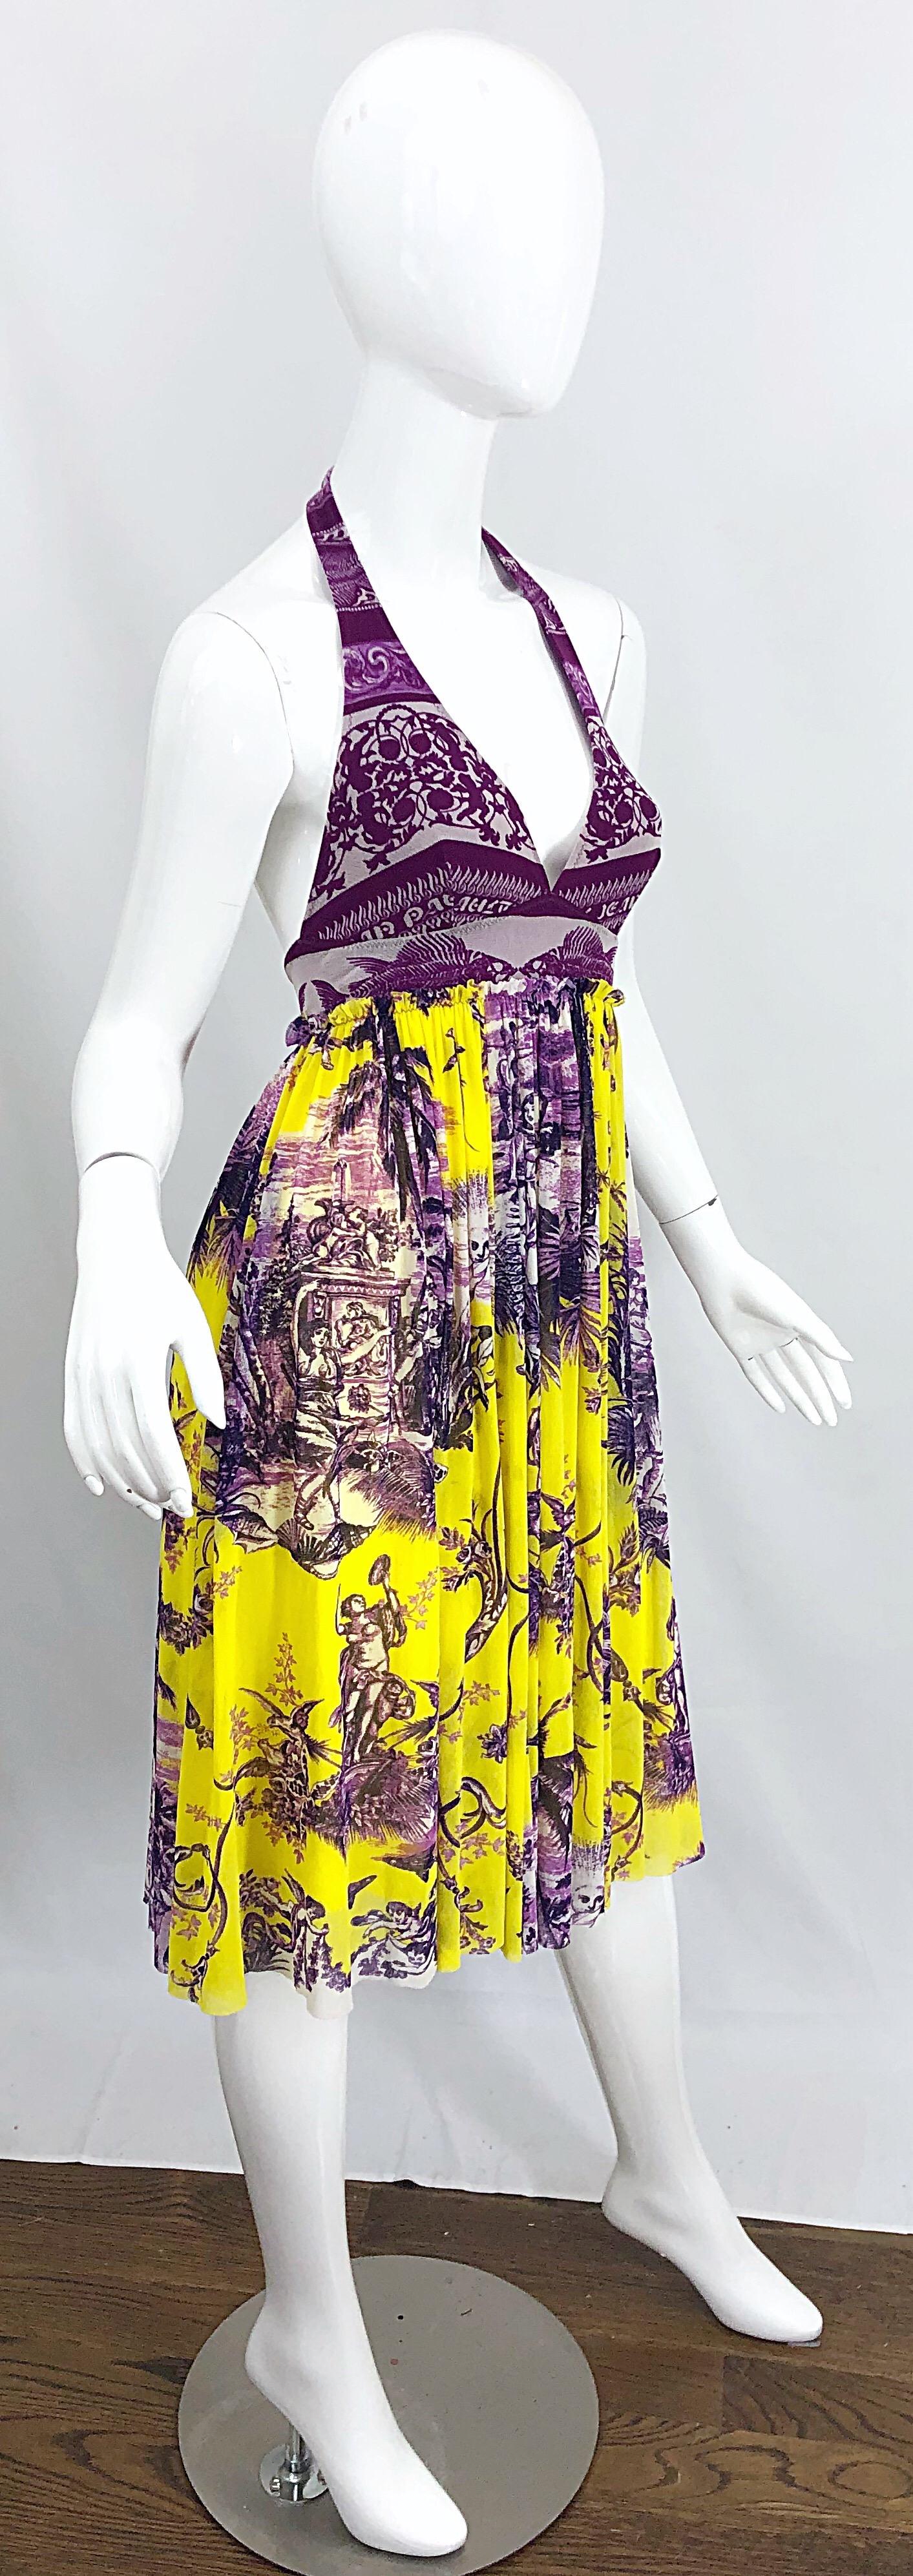 1990s Jean Paul Gaultier Cherub Print Yellow and Purple Vintage Halter Dress In Excellent Condition For Sale In San Diego, CA